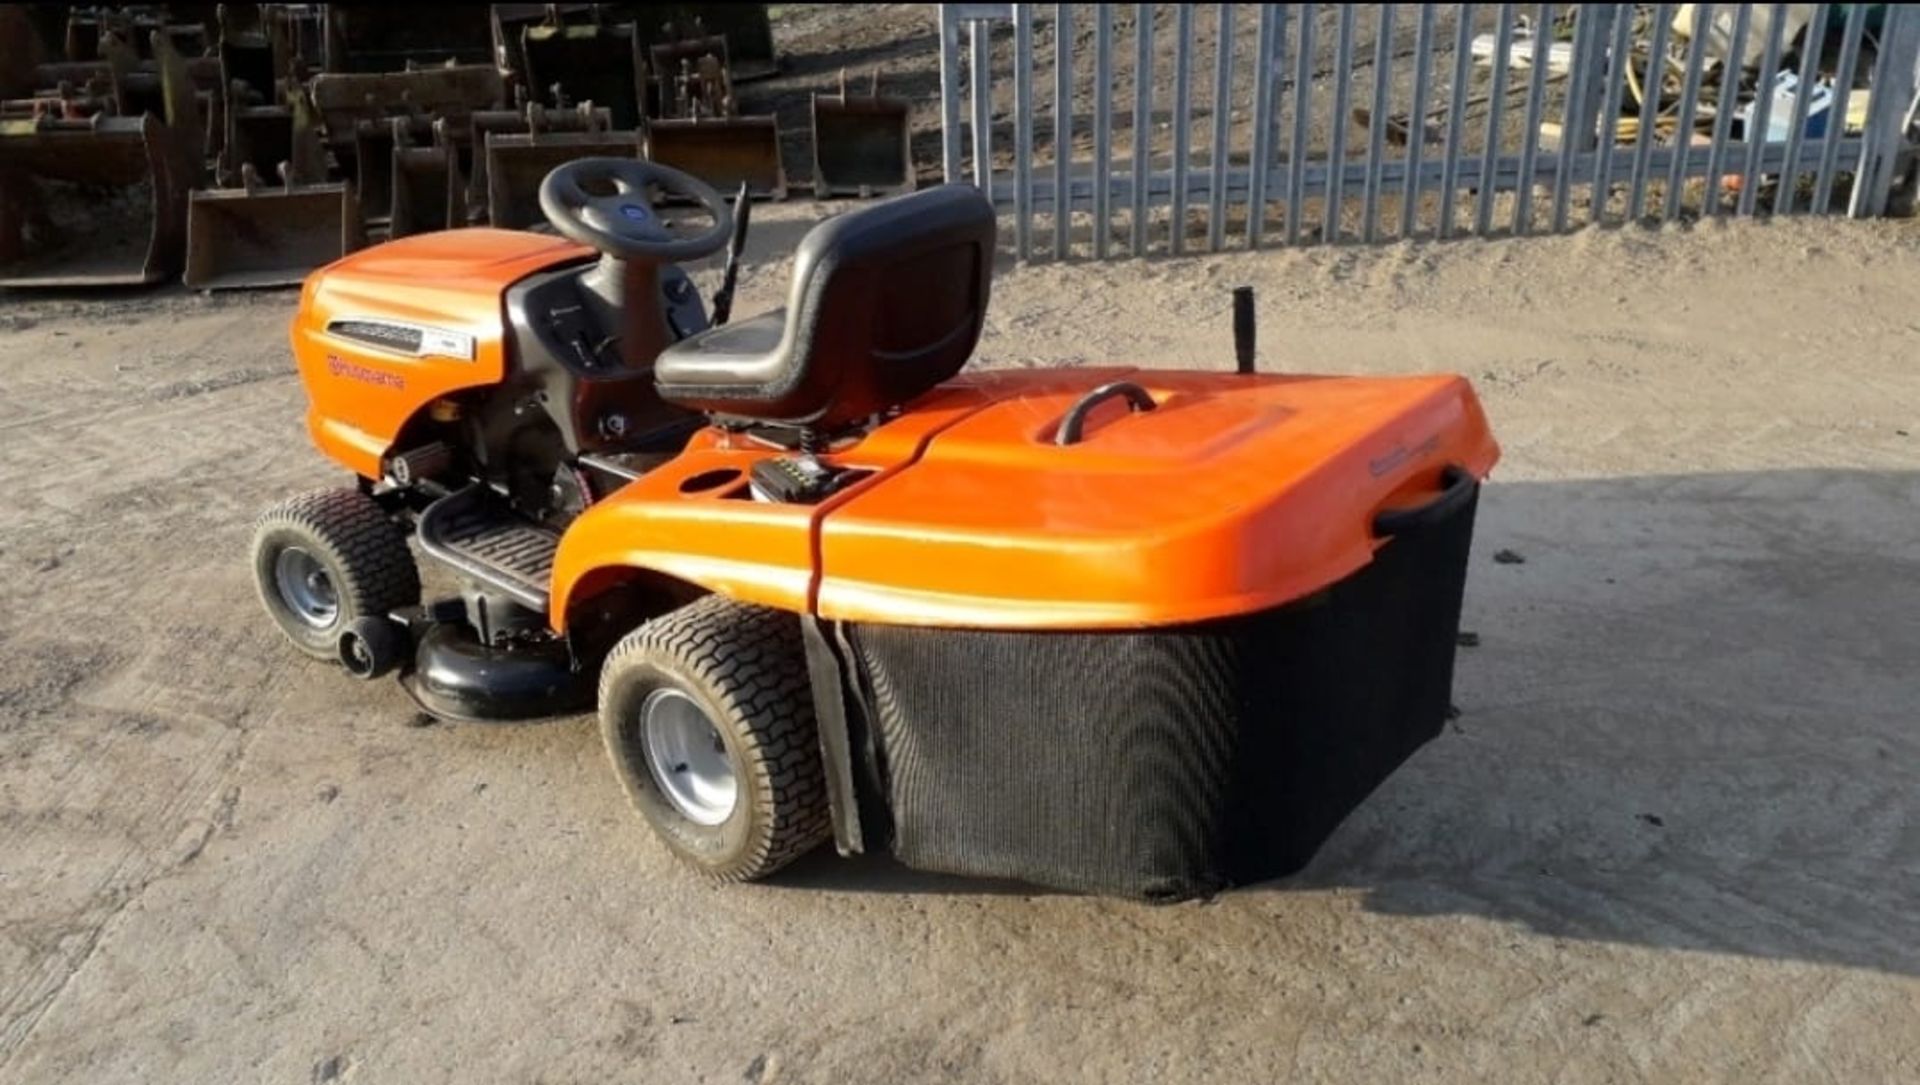 2006 HUSQVARNA CT151 PETROL WORKING ORDER COMES WITH GRASS BOX *NO VAT* - Image 4 of 8